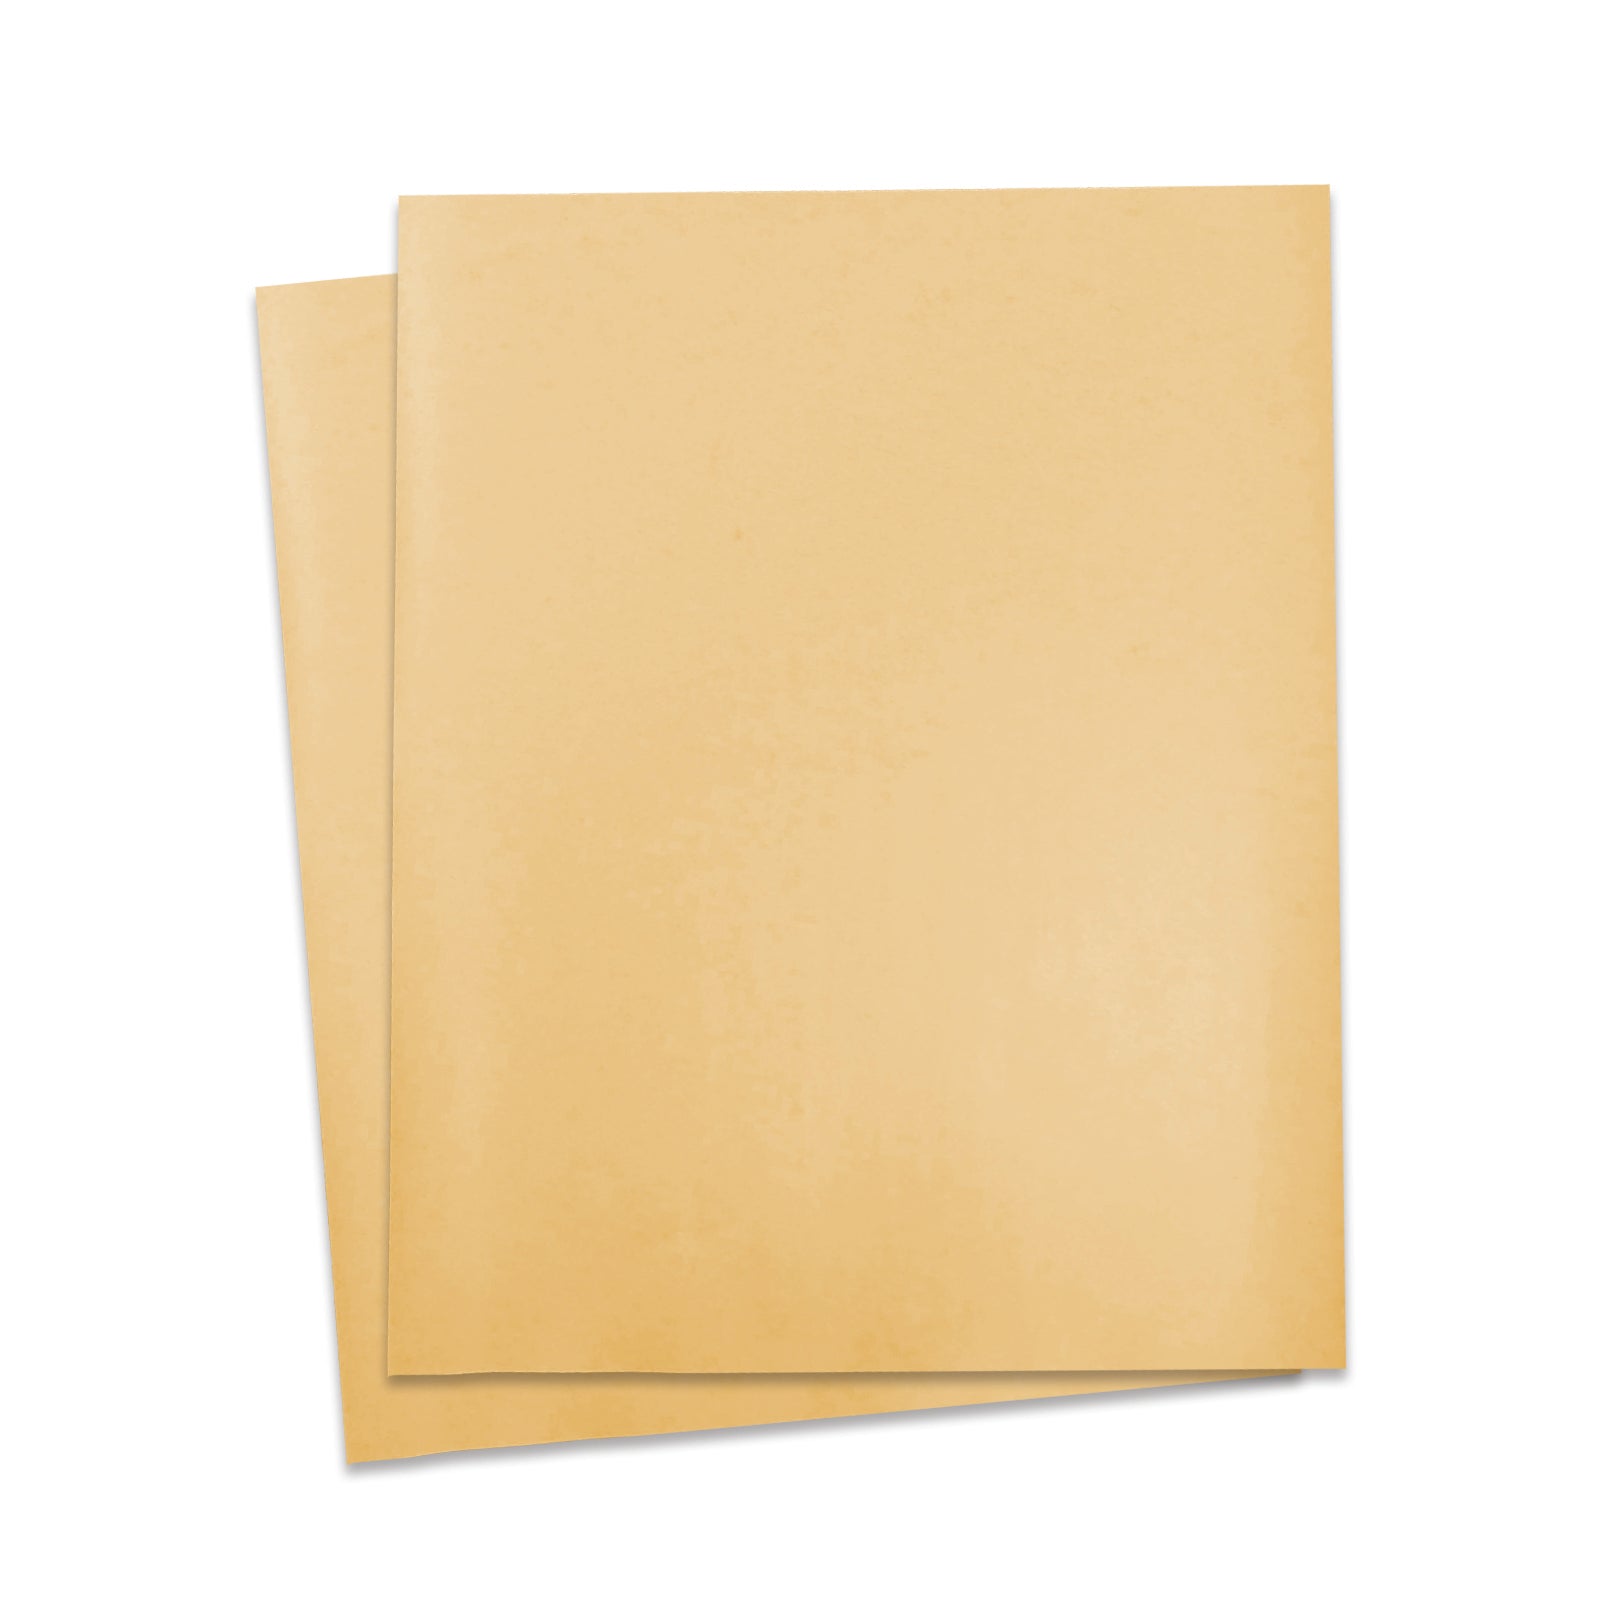 Pre-Cut Parchment Paper for Heating Press - Slick Silicone Coating on Double Sides-100 Sheet Pack (8 x 12)